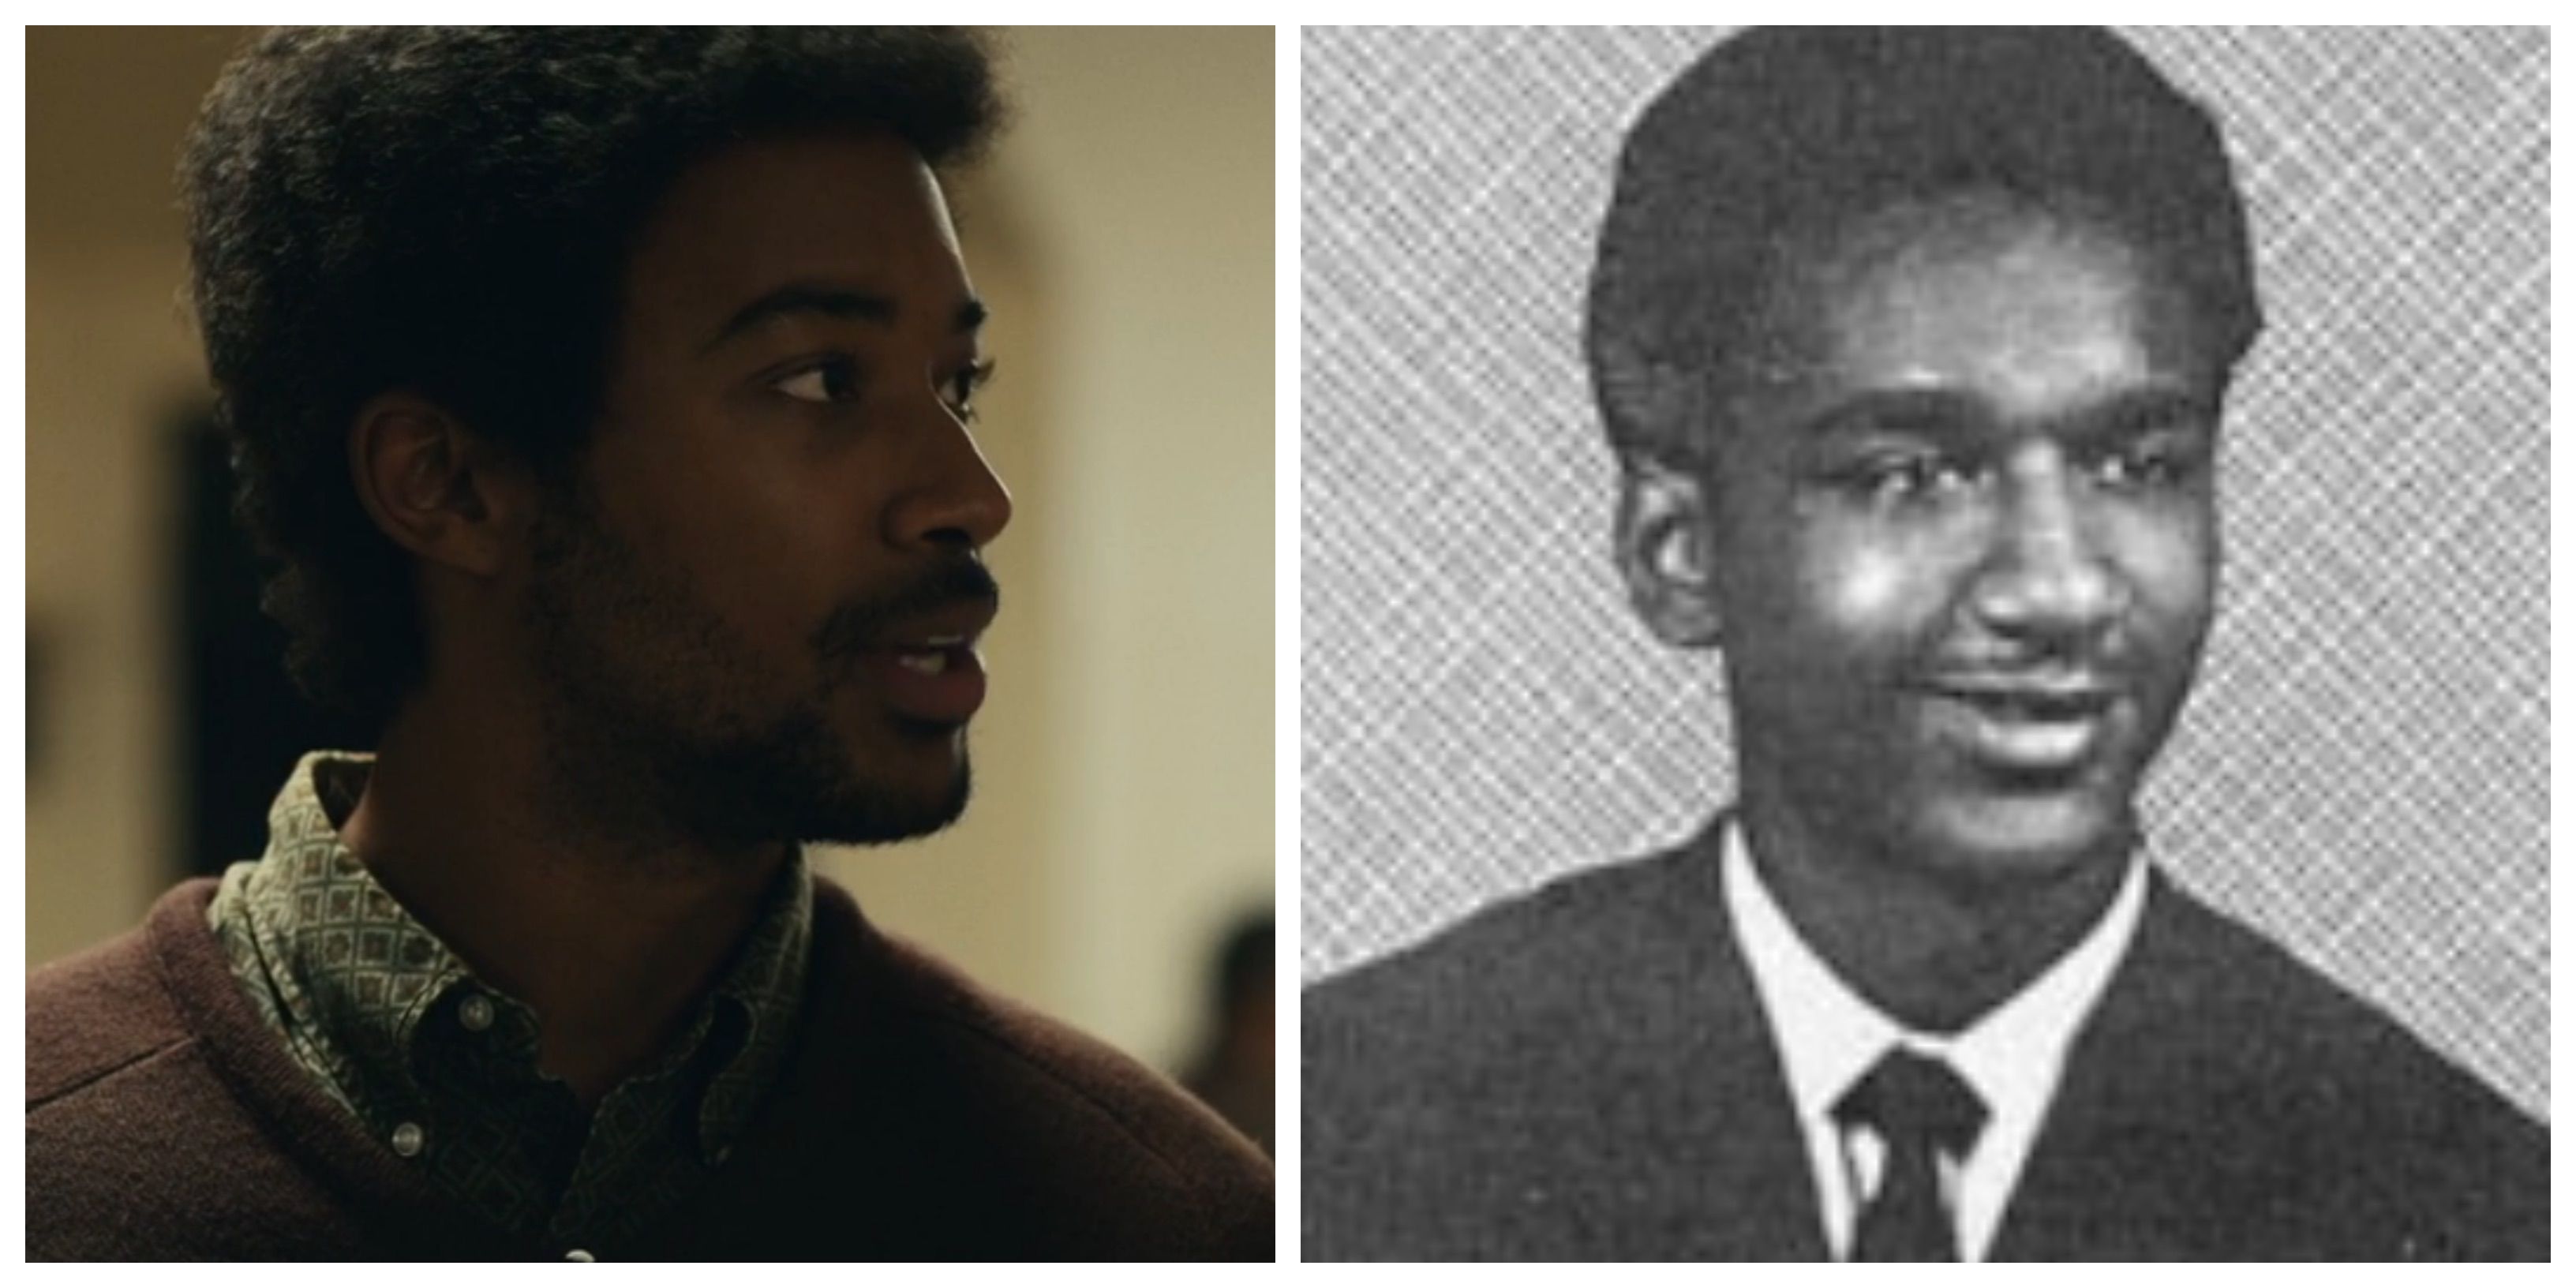 Algee Smith in Judas and the Black Messiah